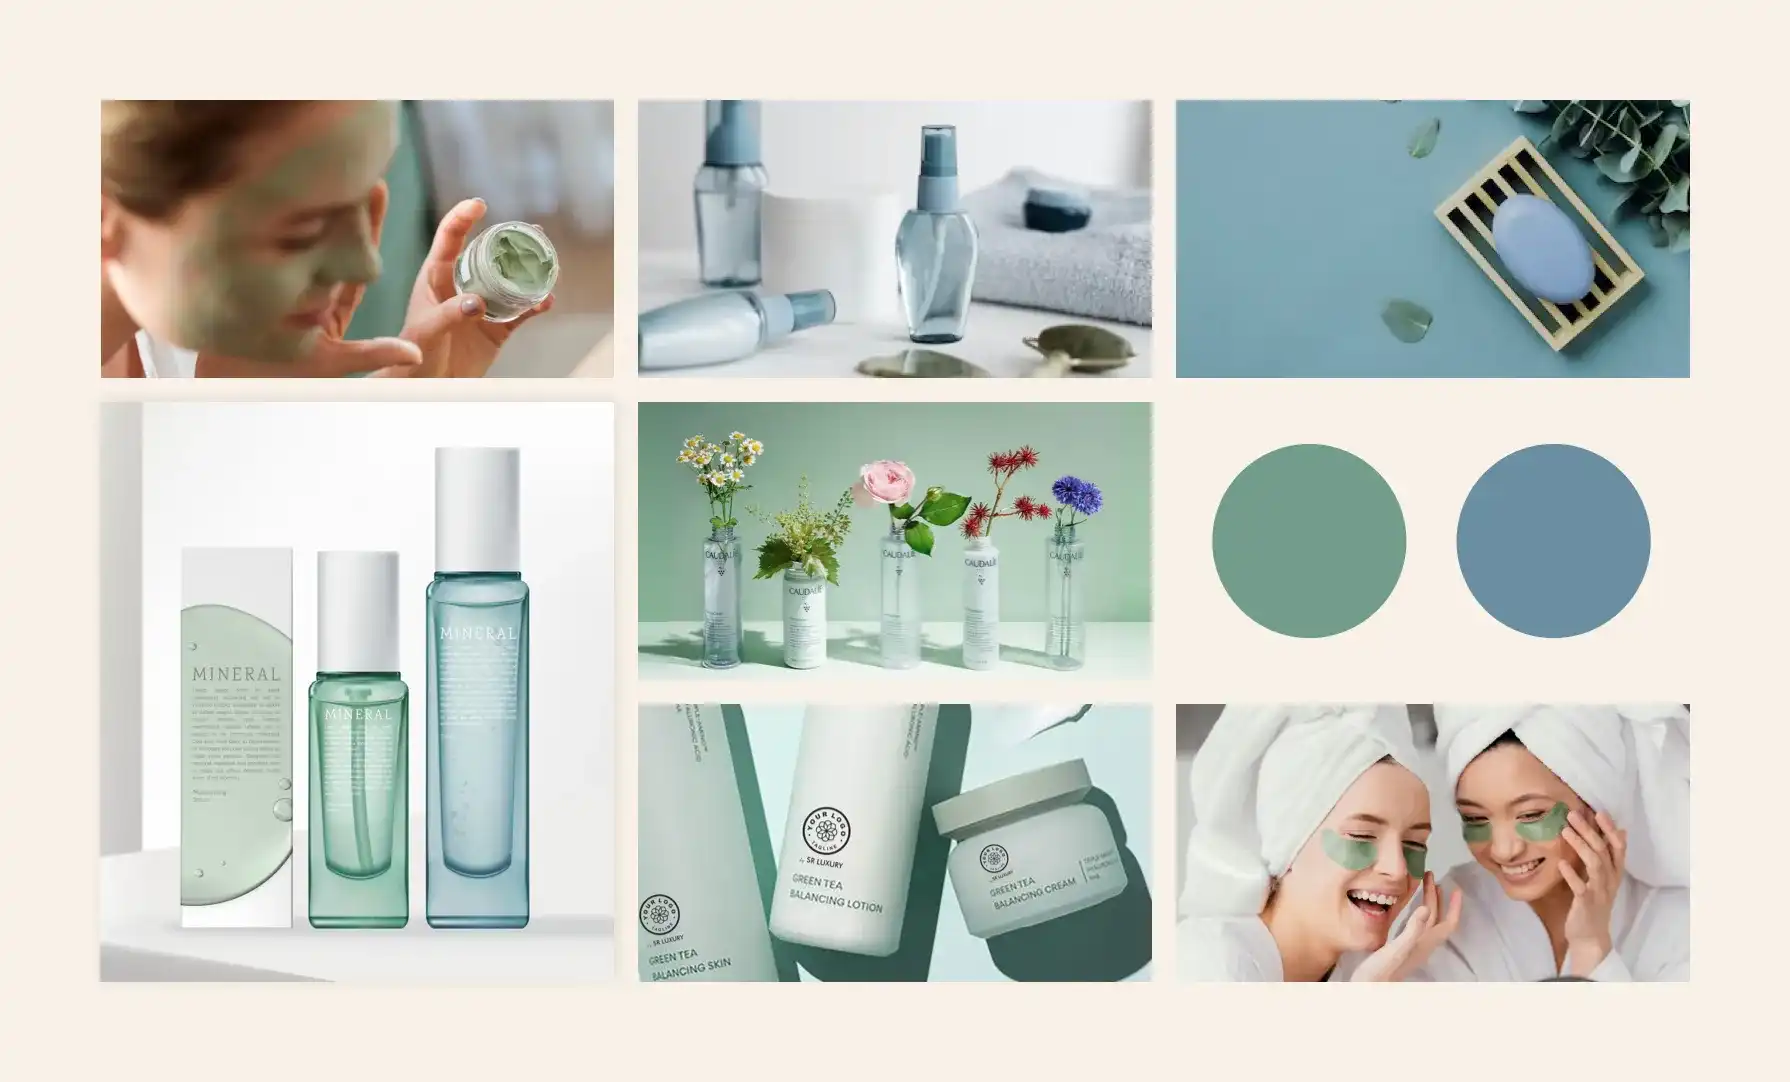 Moodboard of primary brand colors for fictional premium skincare brand ‘XYZ,’ displayed on product packaging and across various applications. by Naif Ekkeri from wowstudio.io